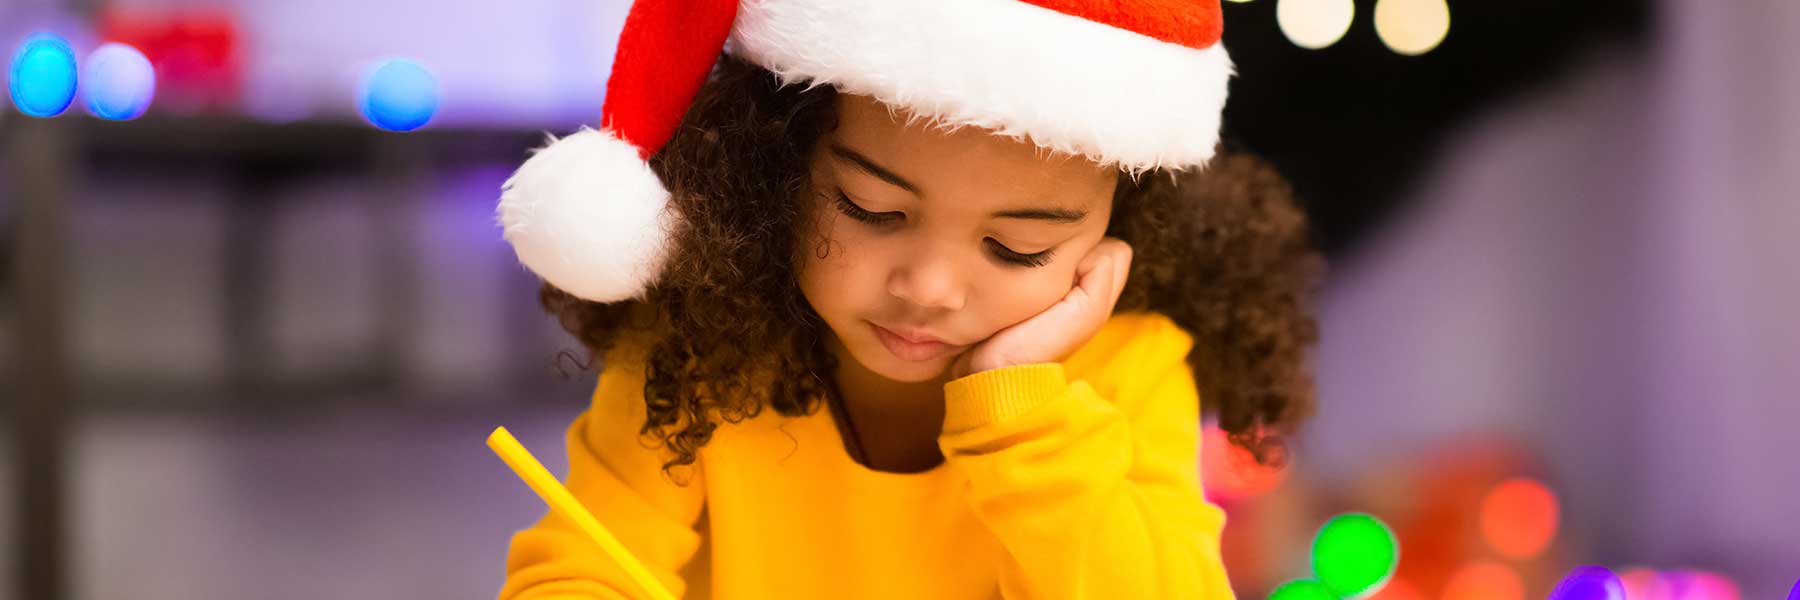 Christmas Child Care and Contact | Family Law